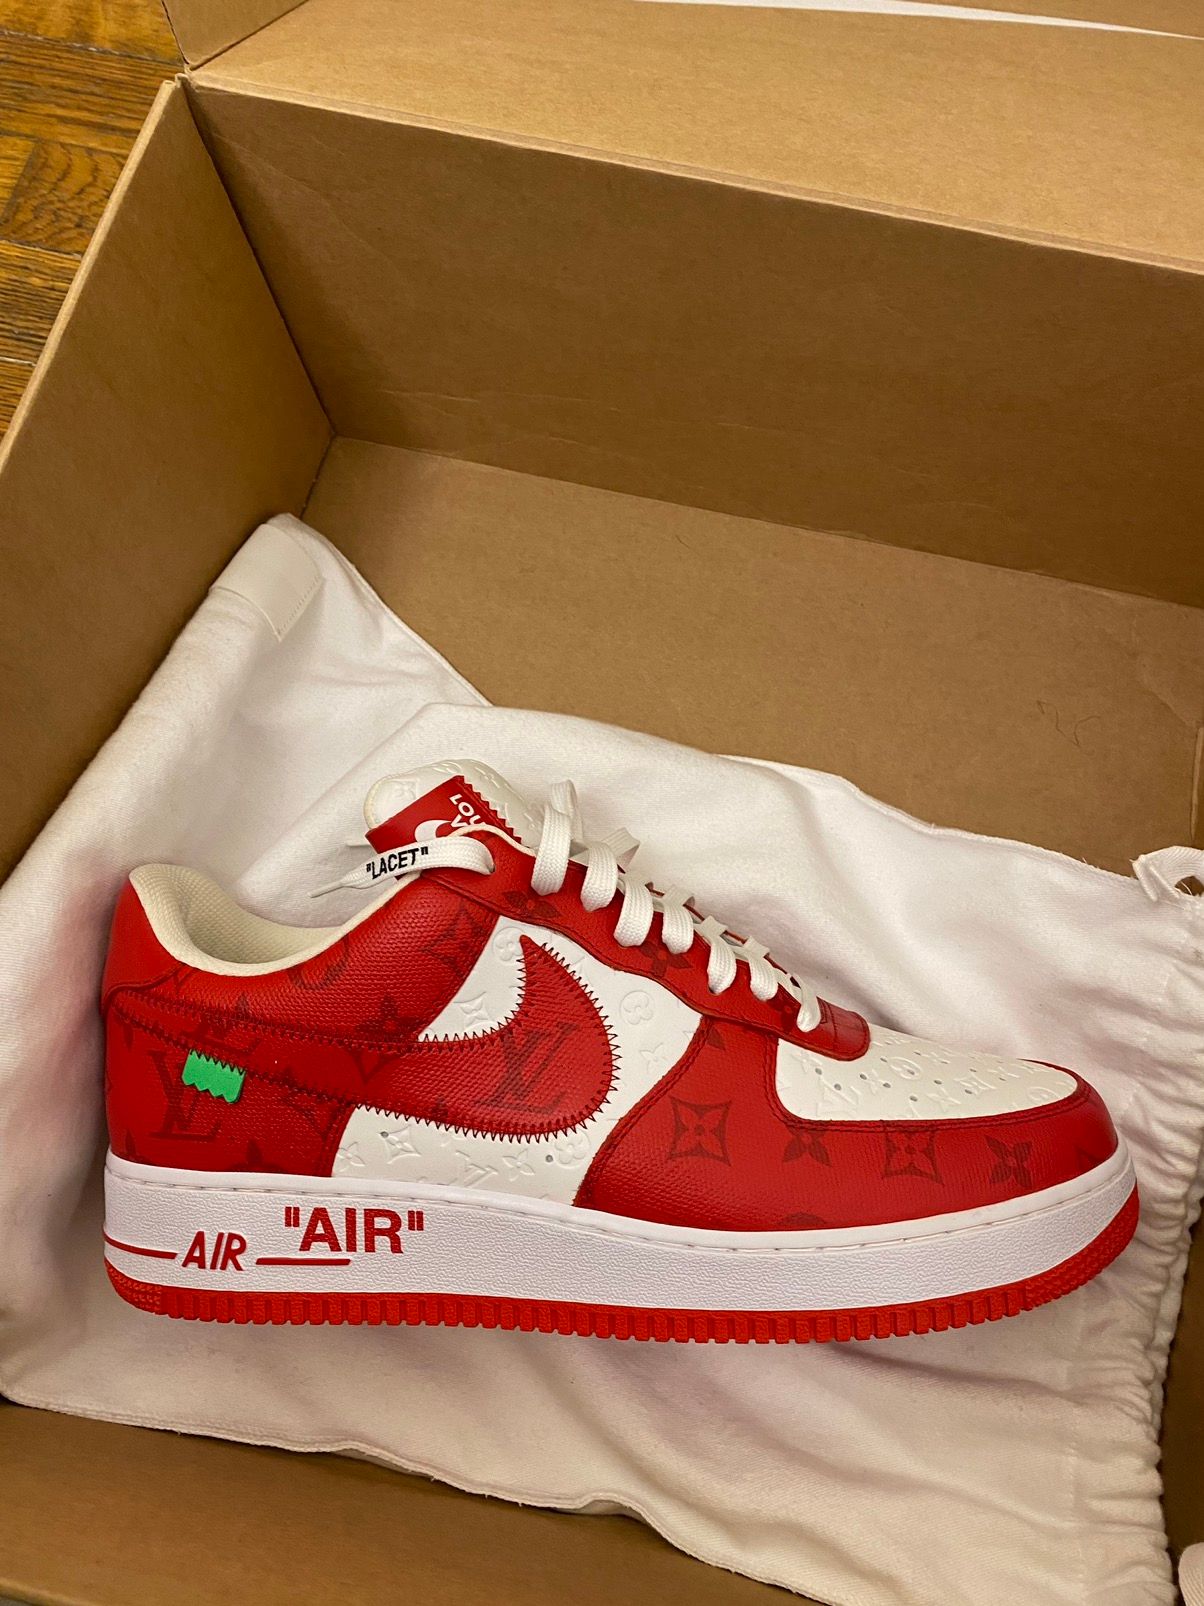 Nike Louis Vuitton x Air Force 1 Low 'White Comet Red' - 1A9V WHITE RED